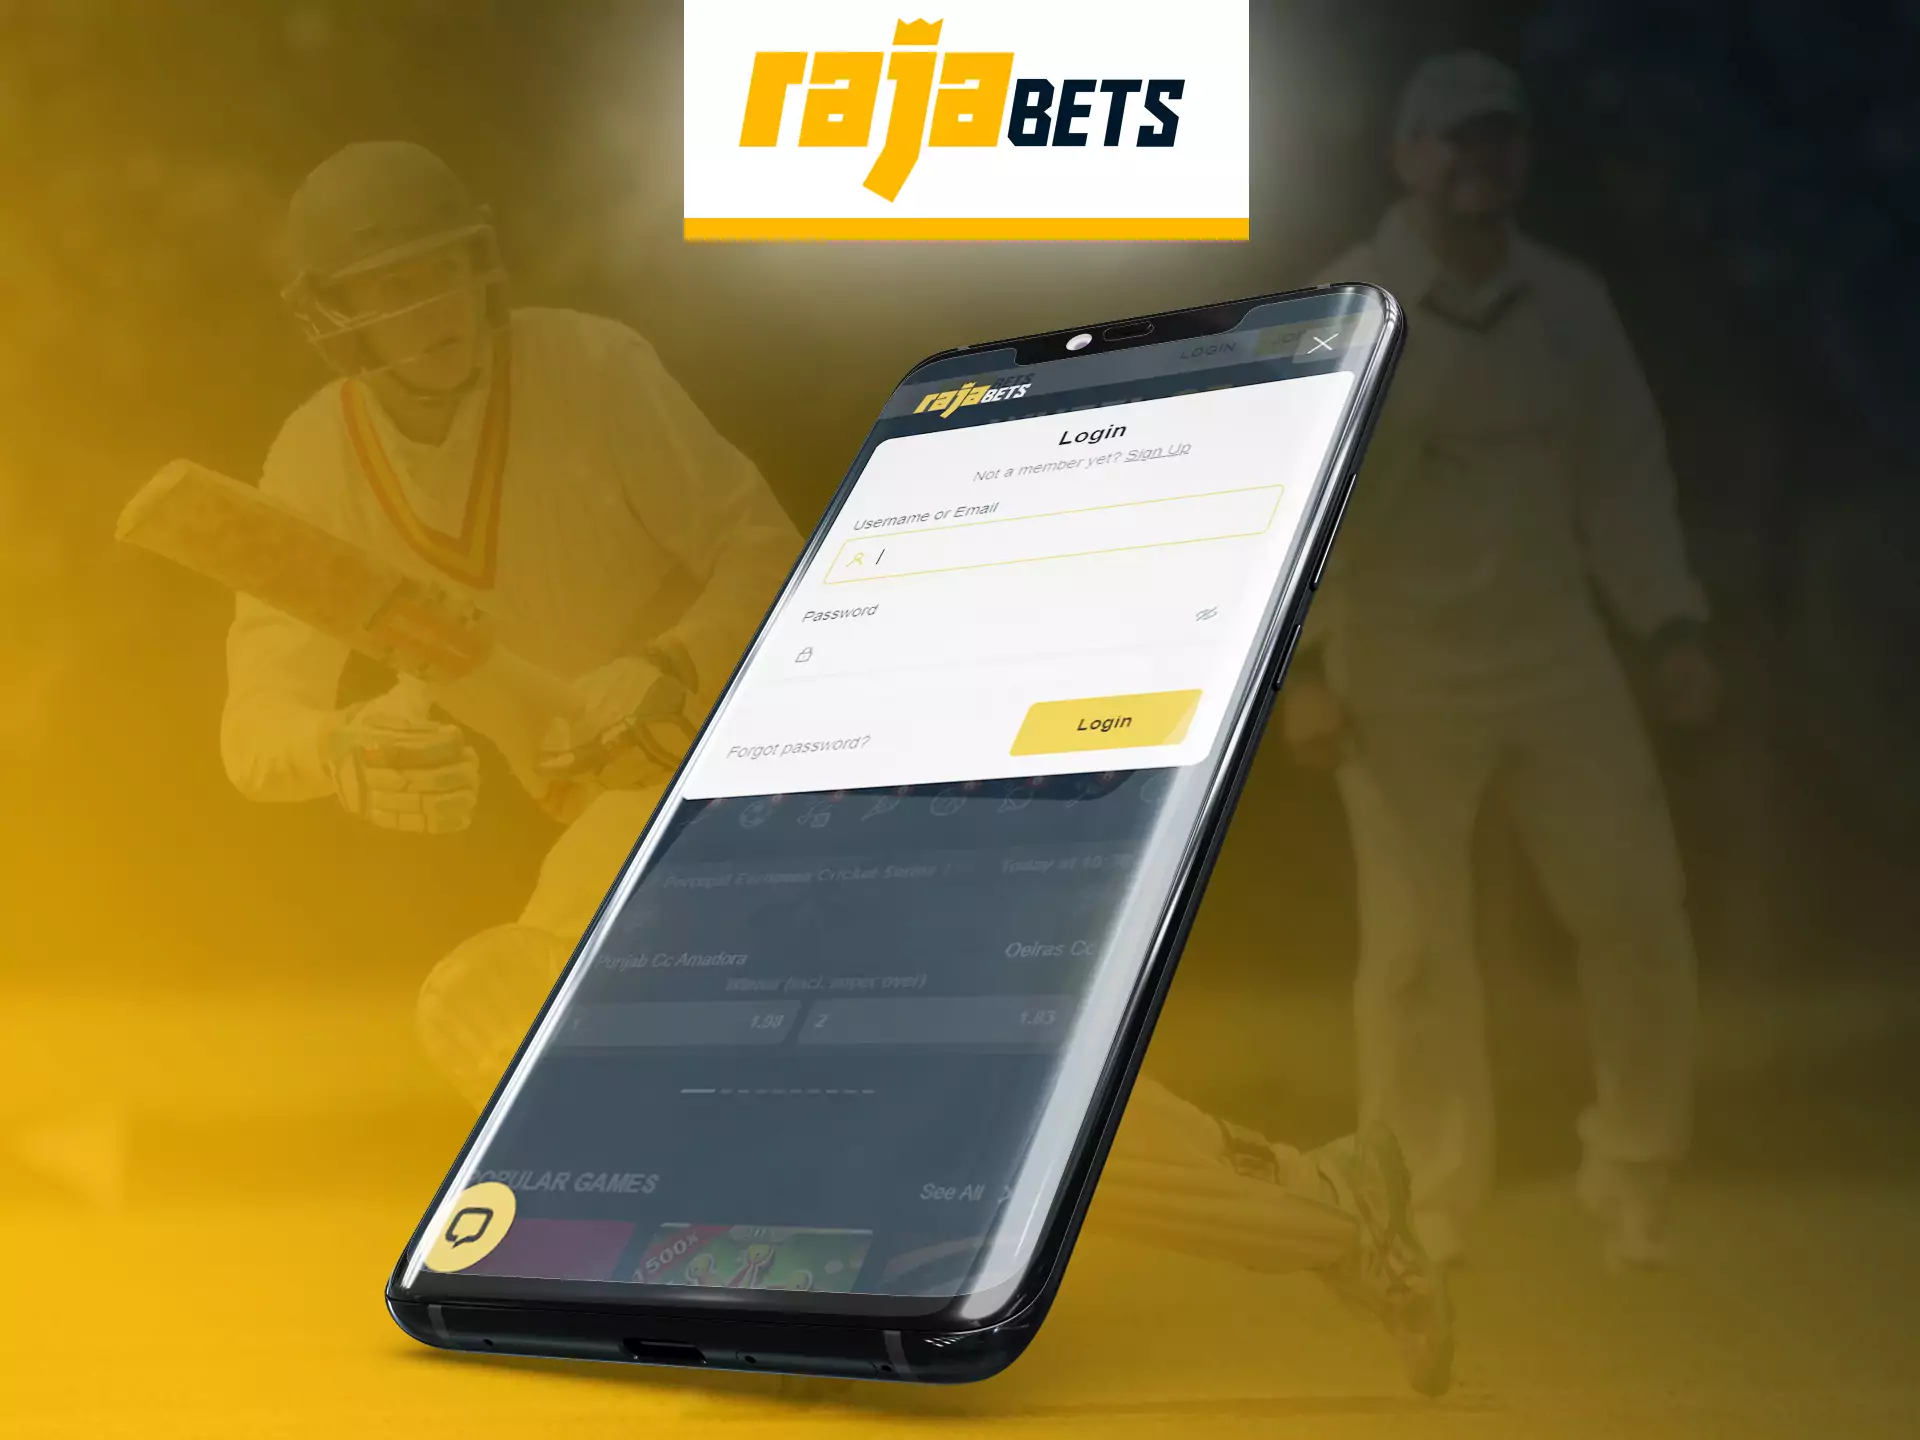 On Rajabets app, log in to your account to use all the features and bonuses.